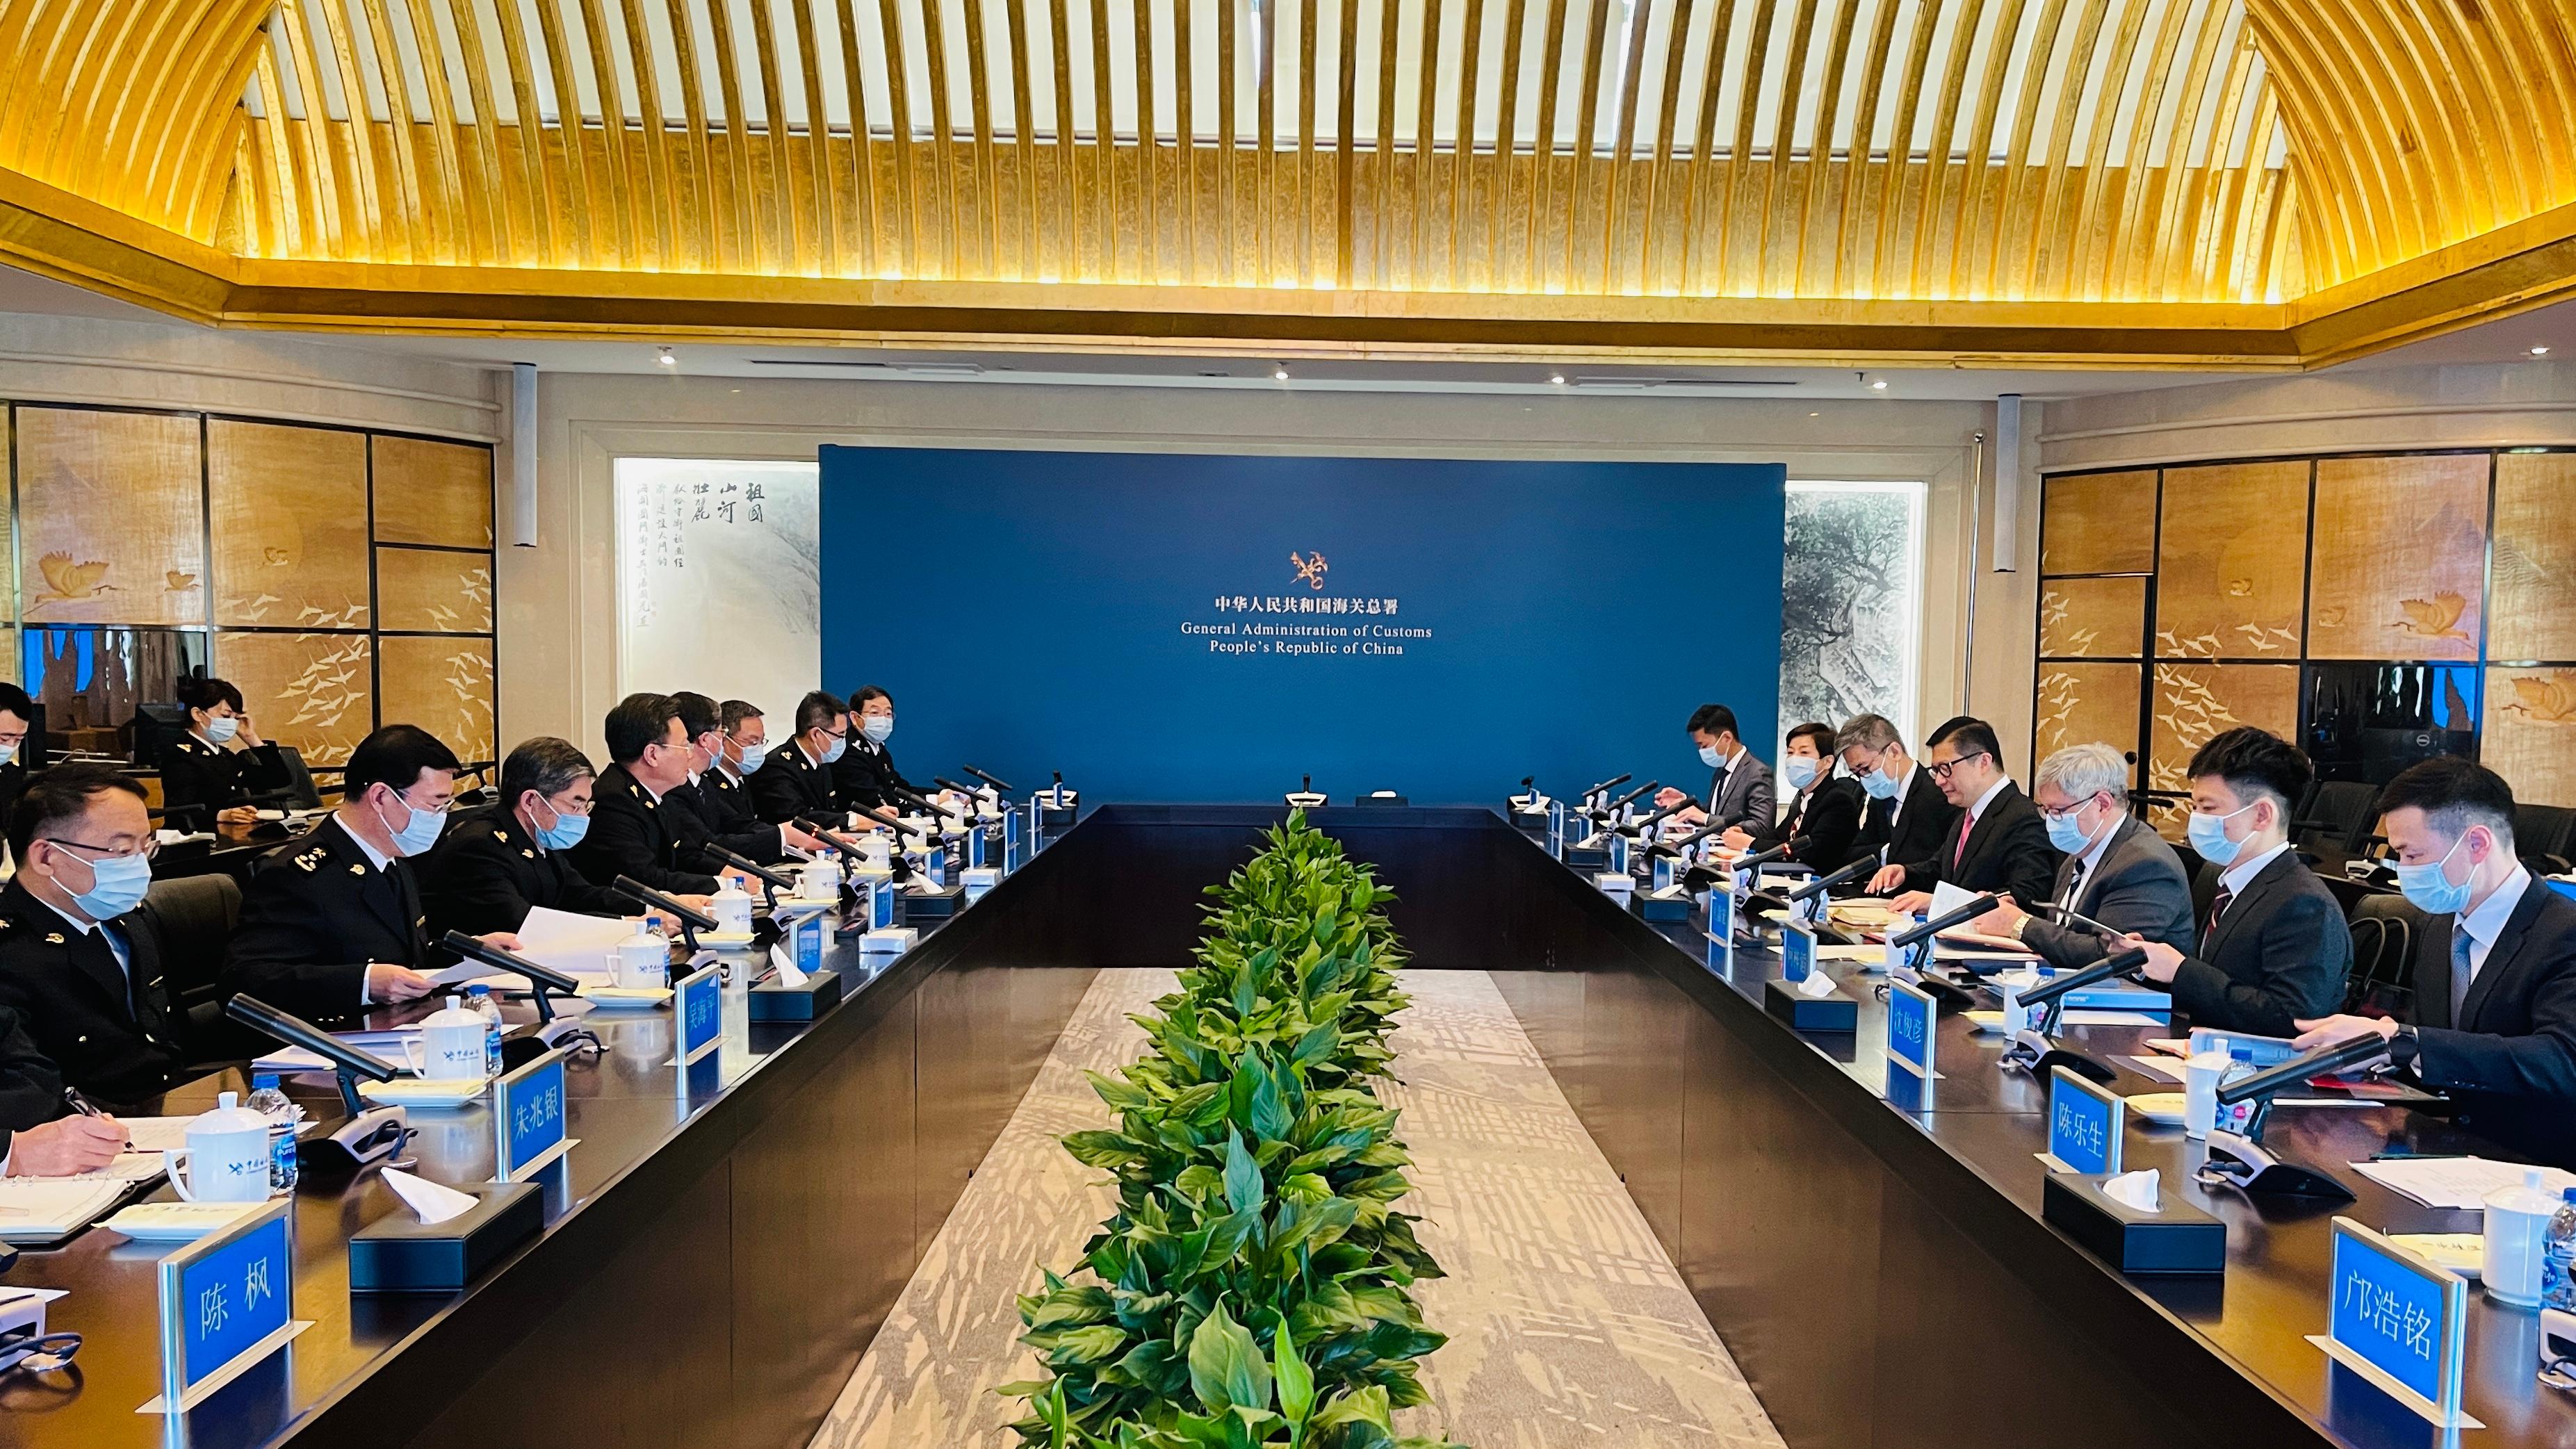 The Secretary for Security, Mr Tang Ping-keung, continued the second day of his visit to Beijing today (April 25). Photo shows Mr Tang (fourth right) calling on the General Administration of Customs of the People's Republic of China and exchanging views on strengthening of co-operation with the Mainland Customs.